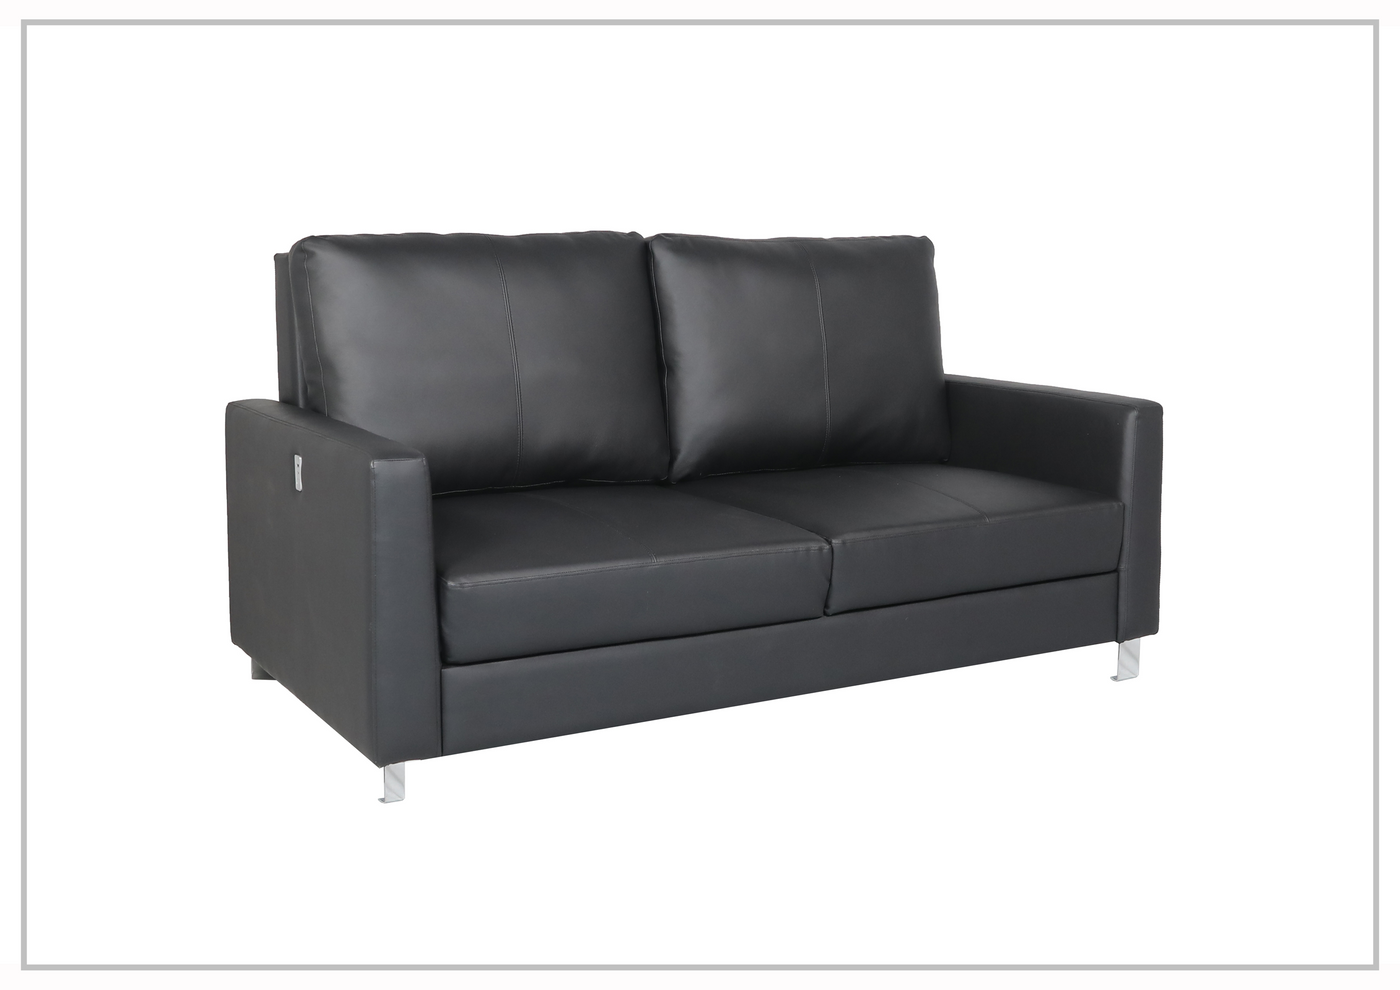 Nova Queen Leather Sleeper Sofa With Wood and Chrome Legs